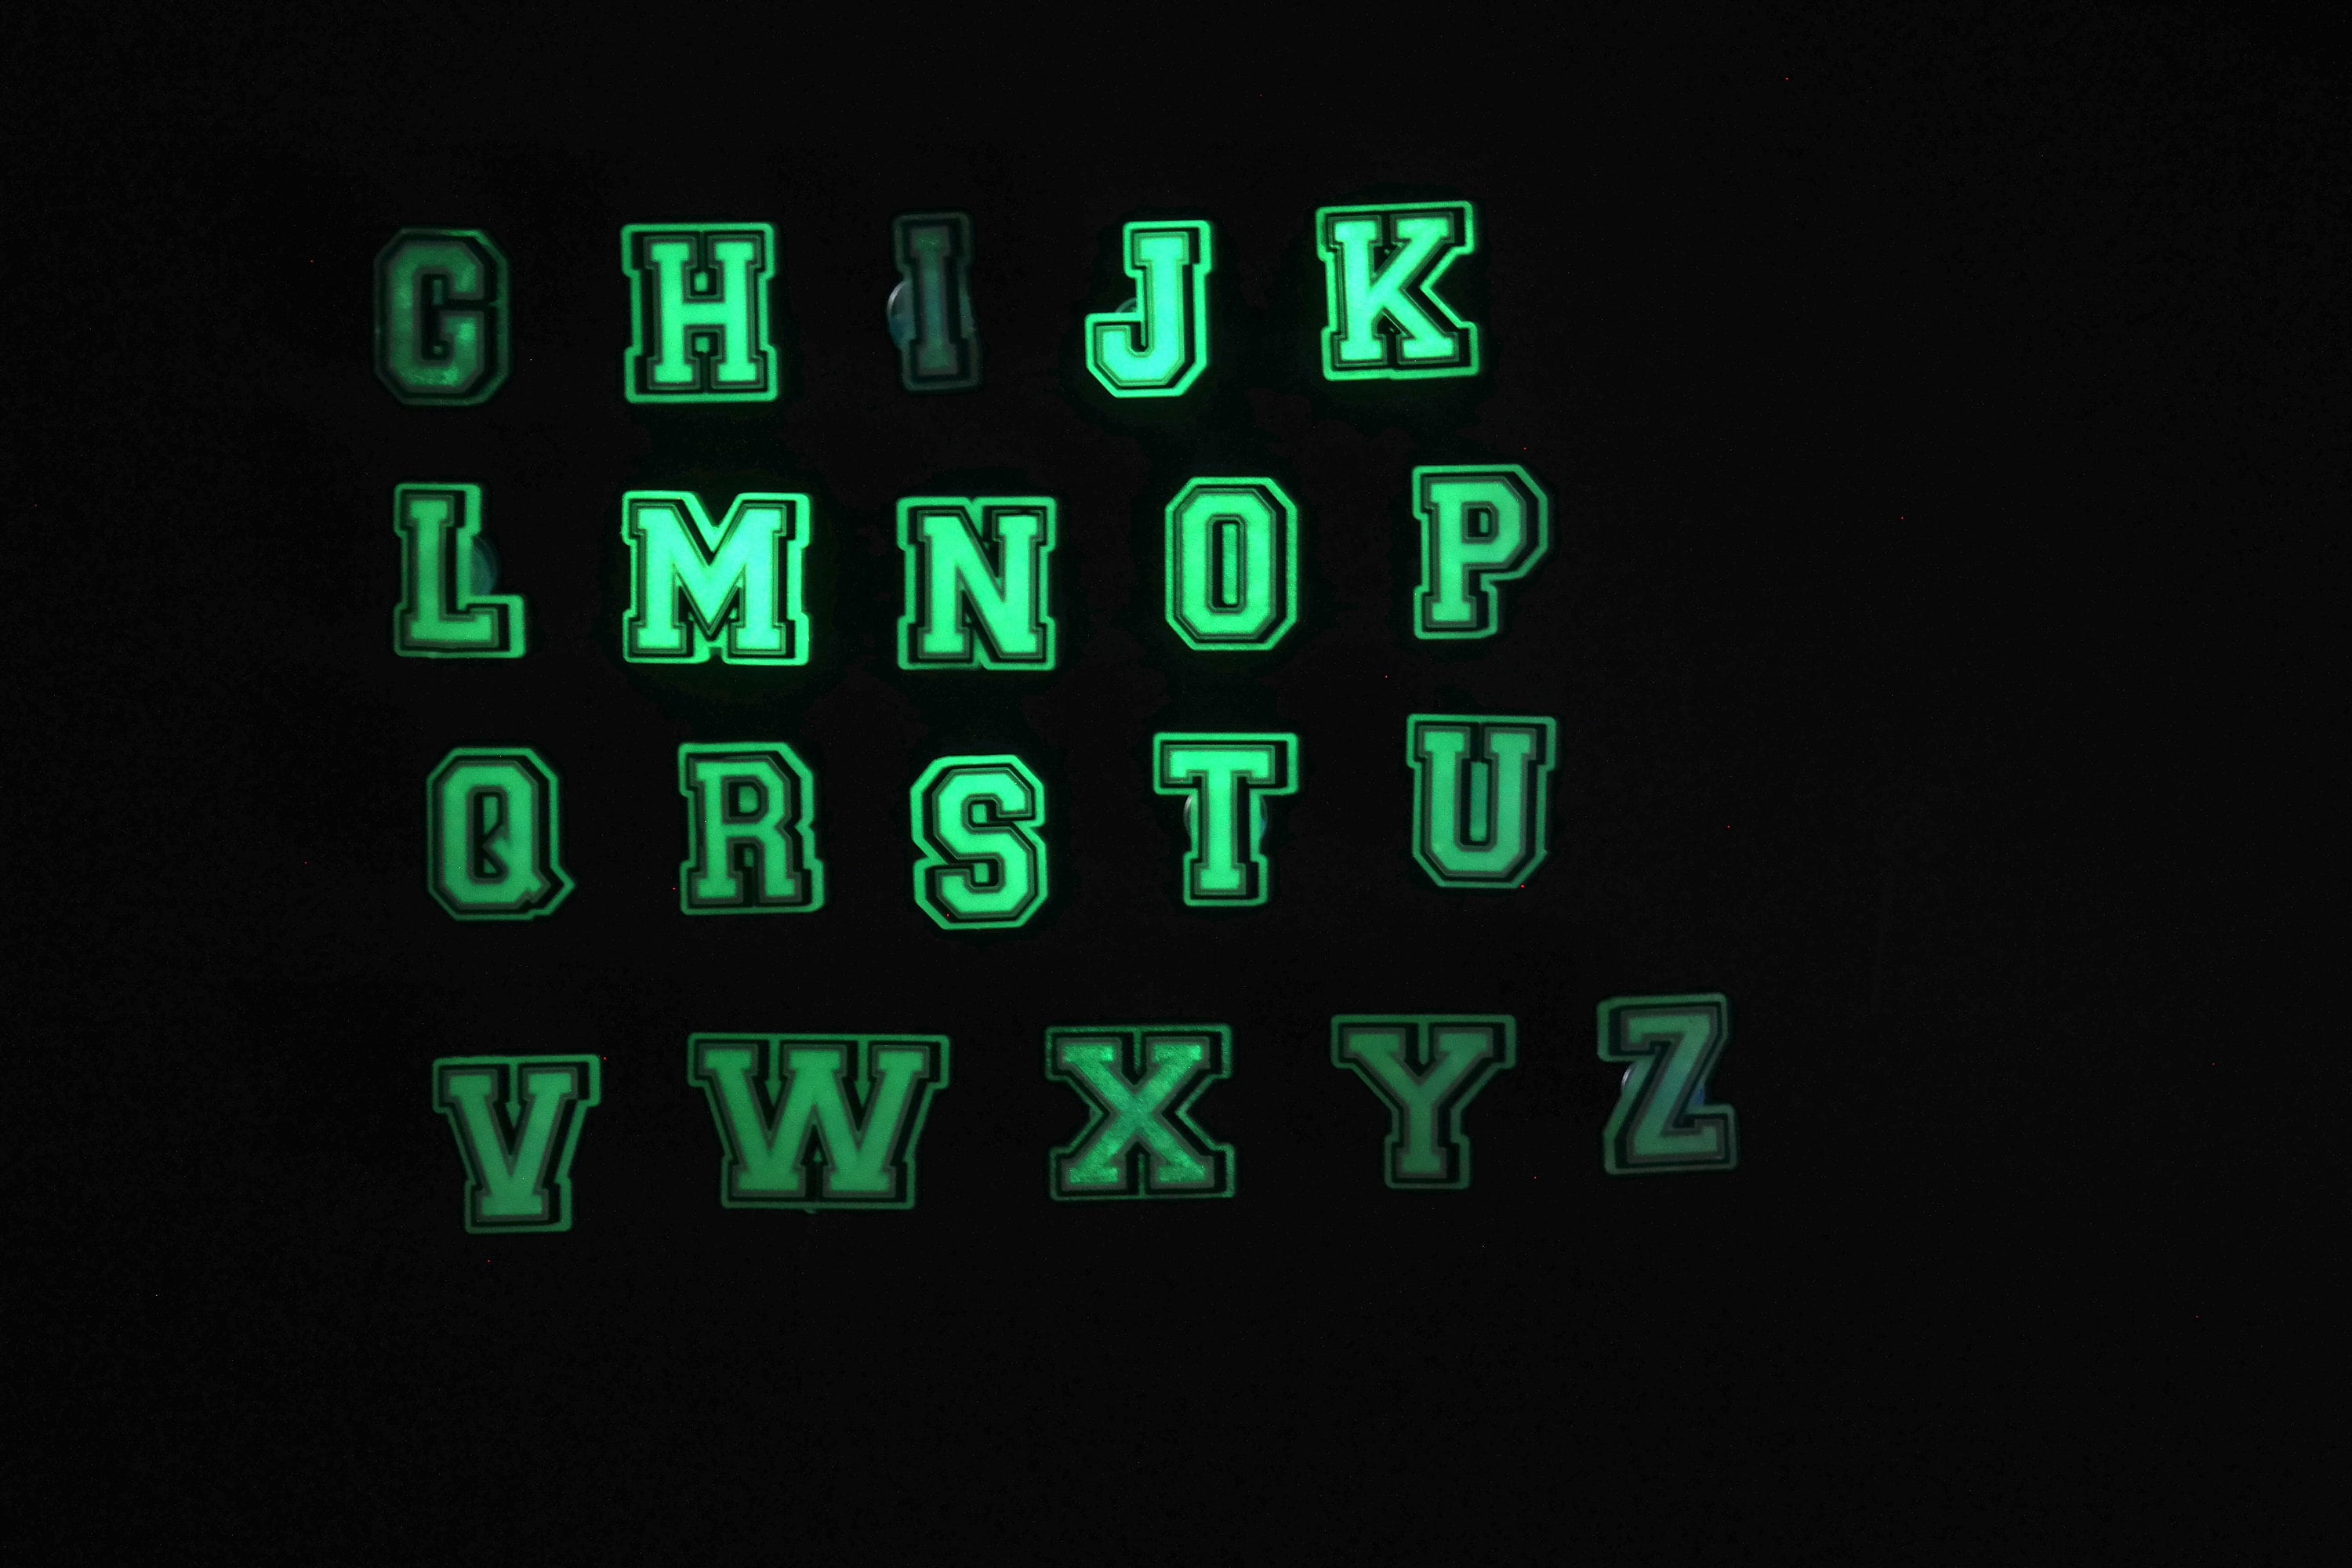 Glow in the Dark Croc Charms Letters and Numbers 